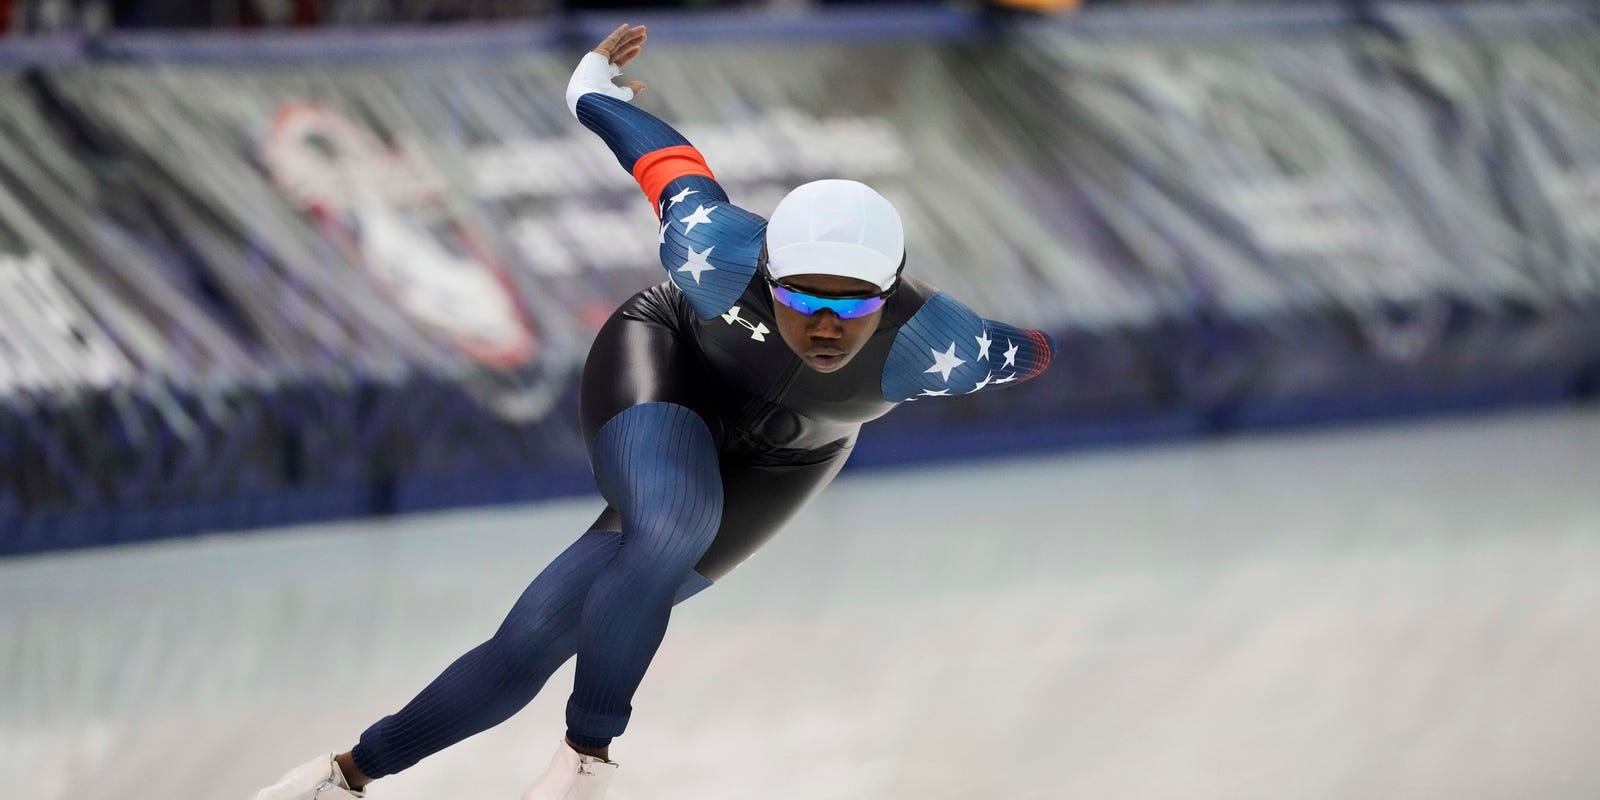 Speedskater Erin Jackson makes whirlwind journey from inlines to ice to possible Olympic gold